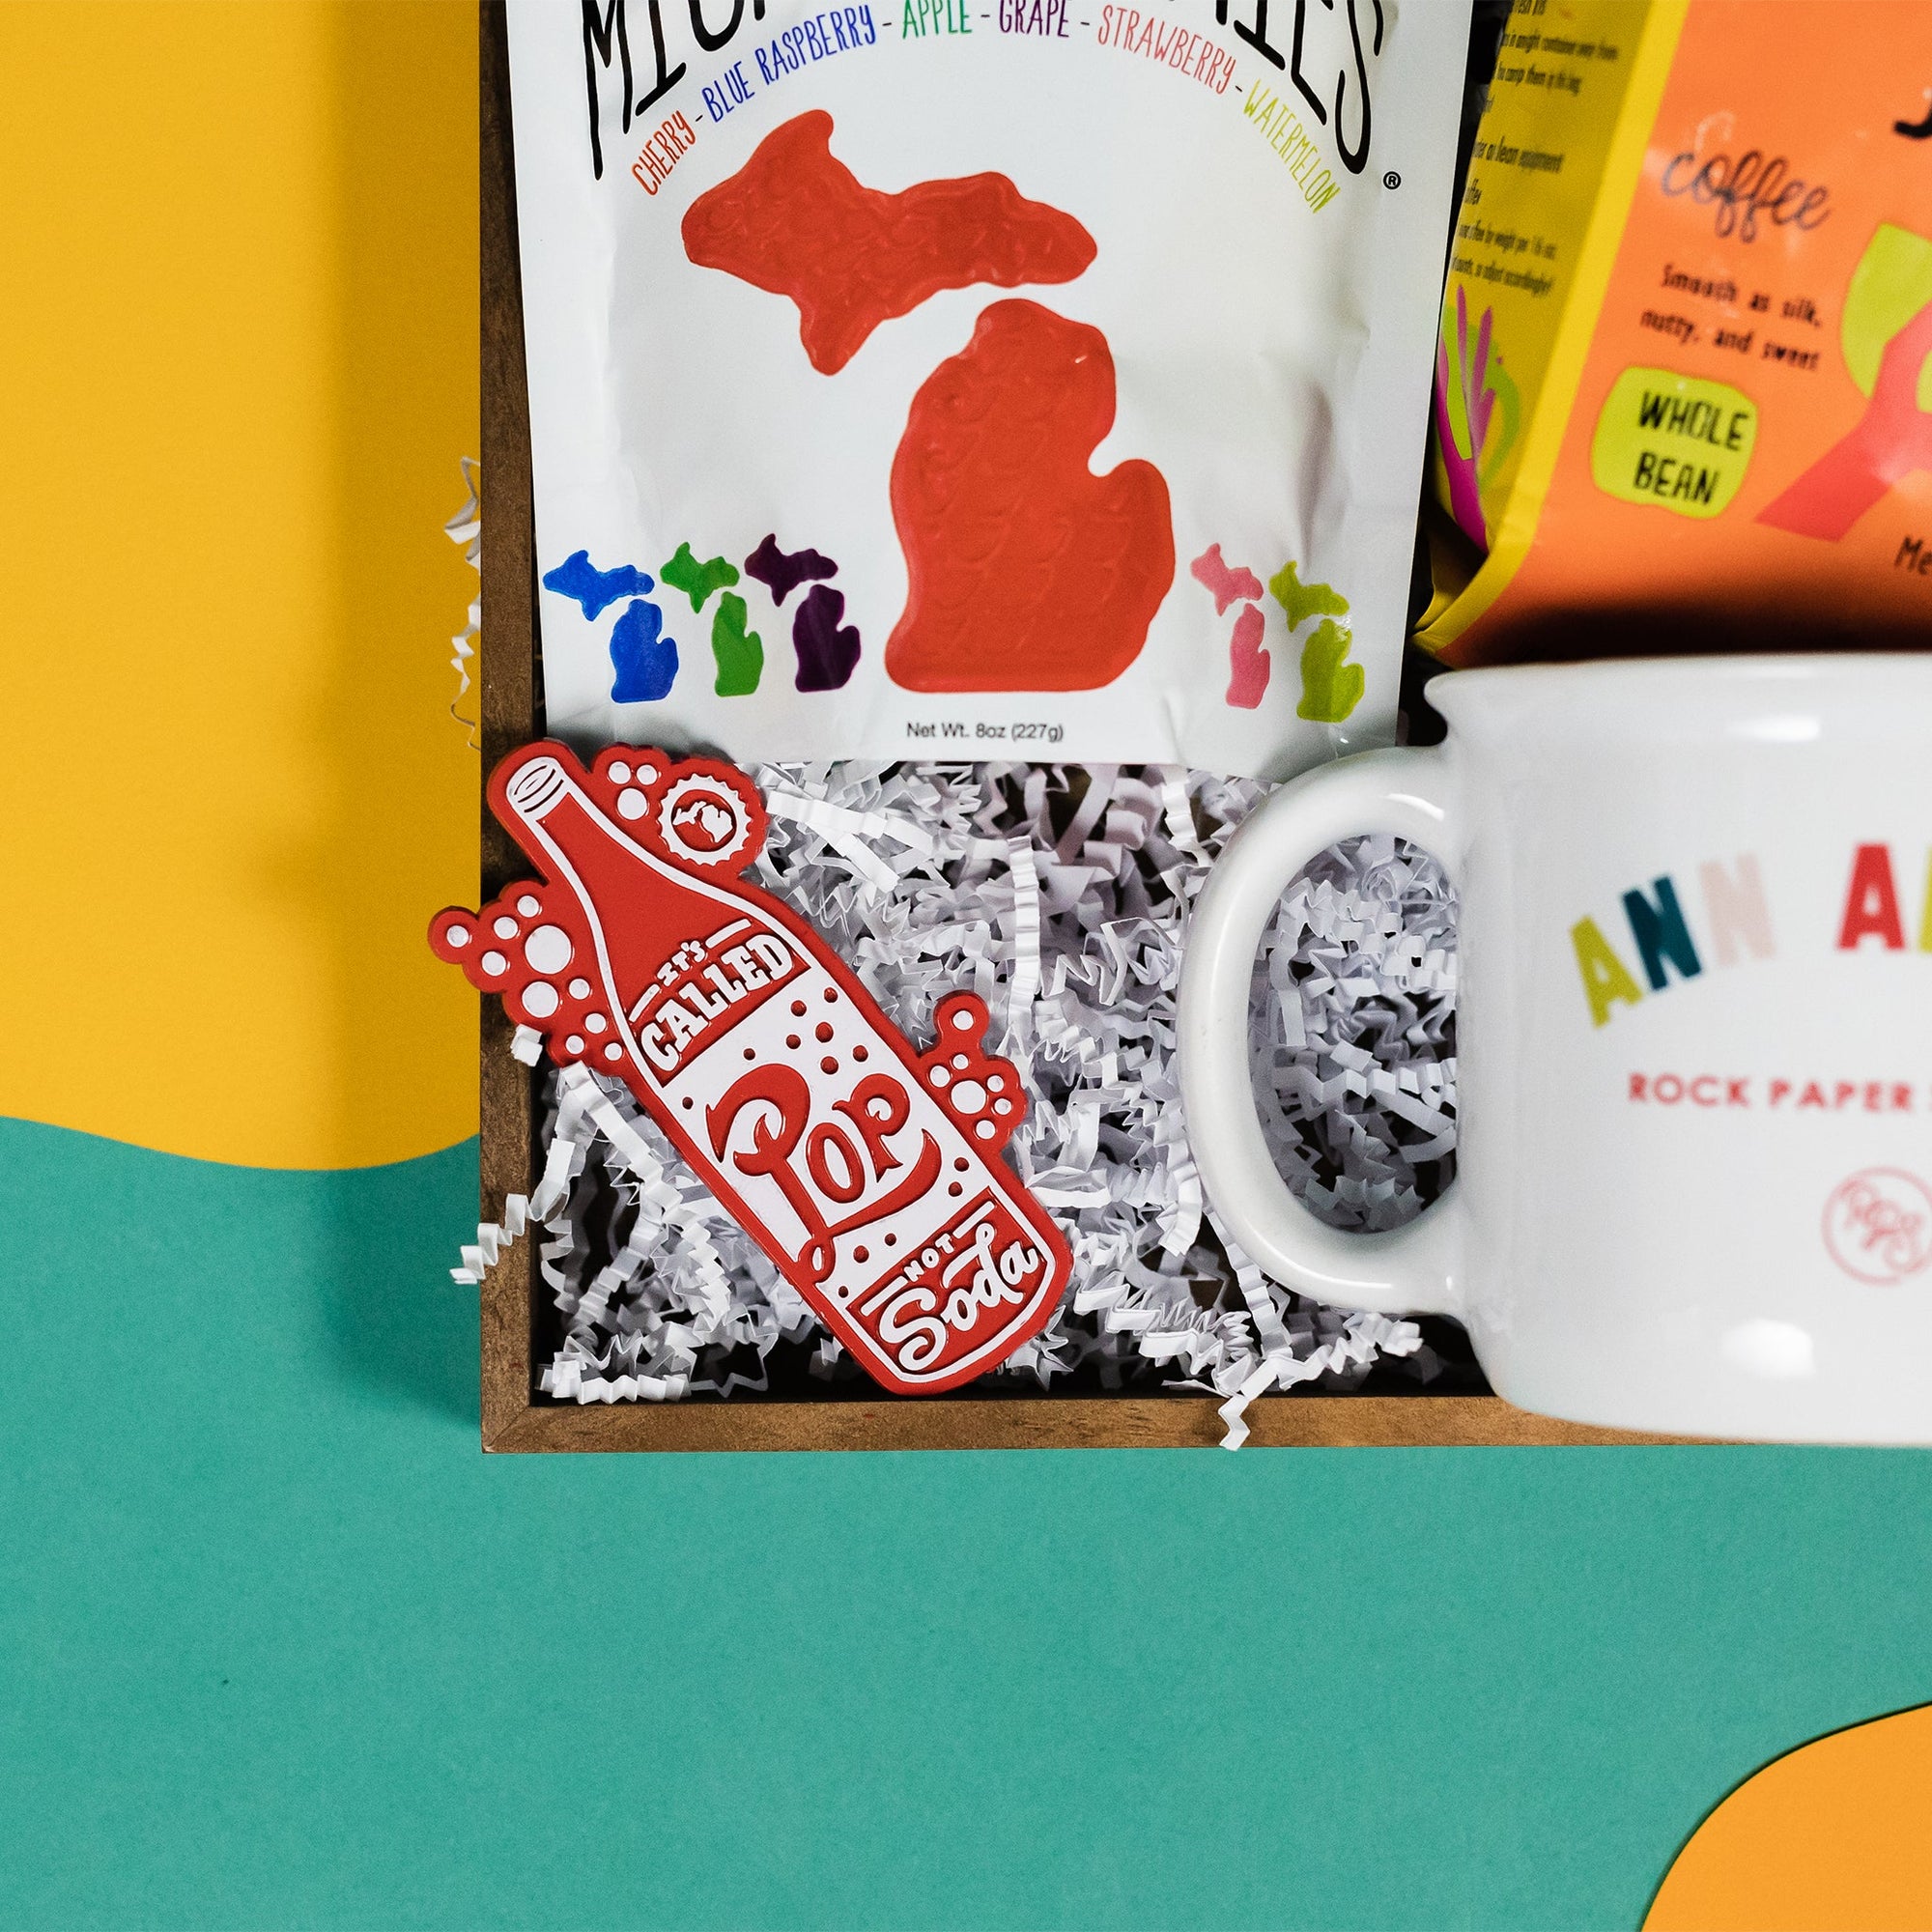 On a bright kelly green background with sunny yellow and orange wobbly cutouts sits a wooden tray with an assortment of Michigan and Ann Arbor themed gifts. This photo is a close-up of the "It's Called Pop Not Soda" red fridge magnet.